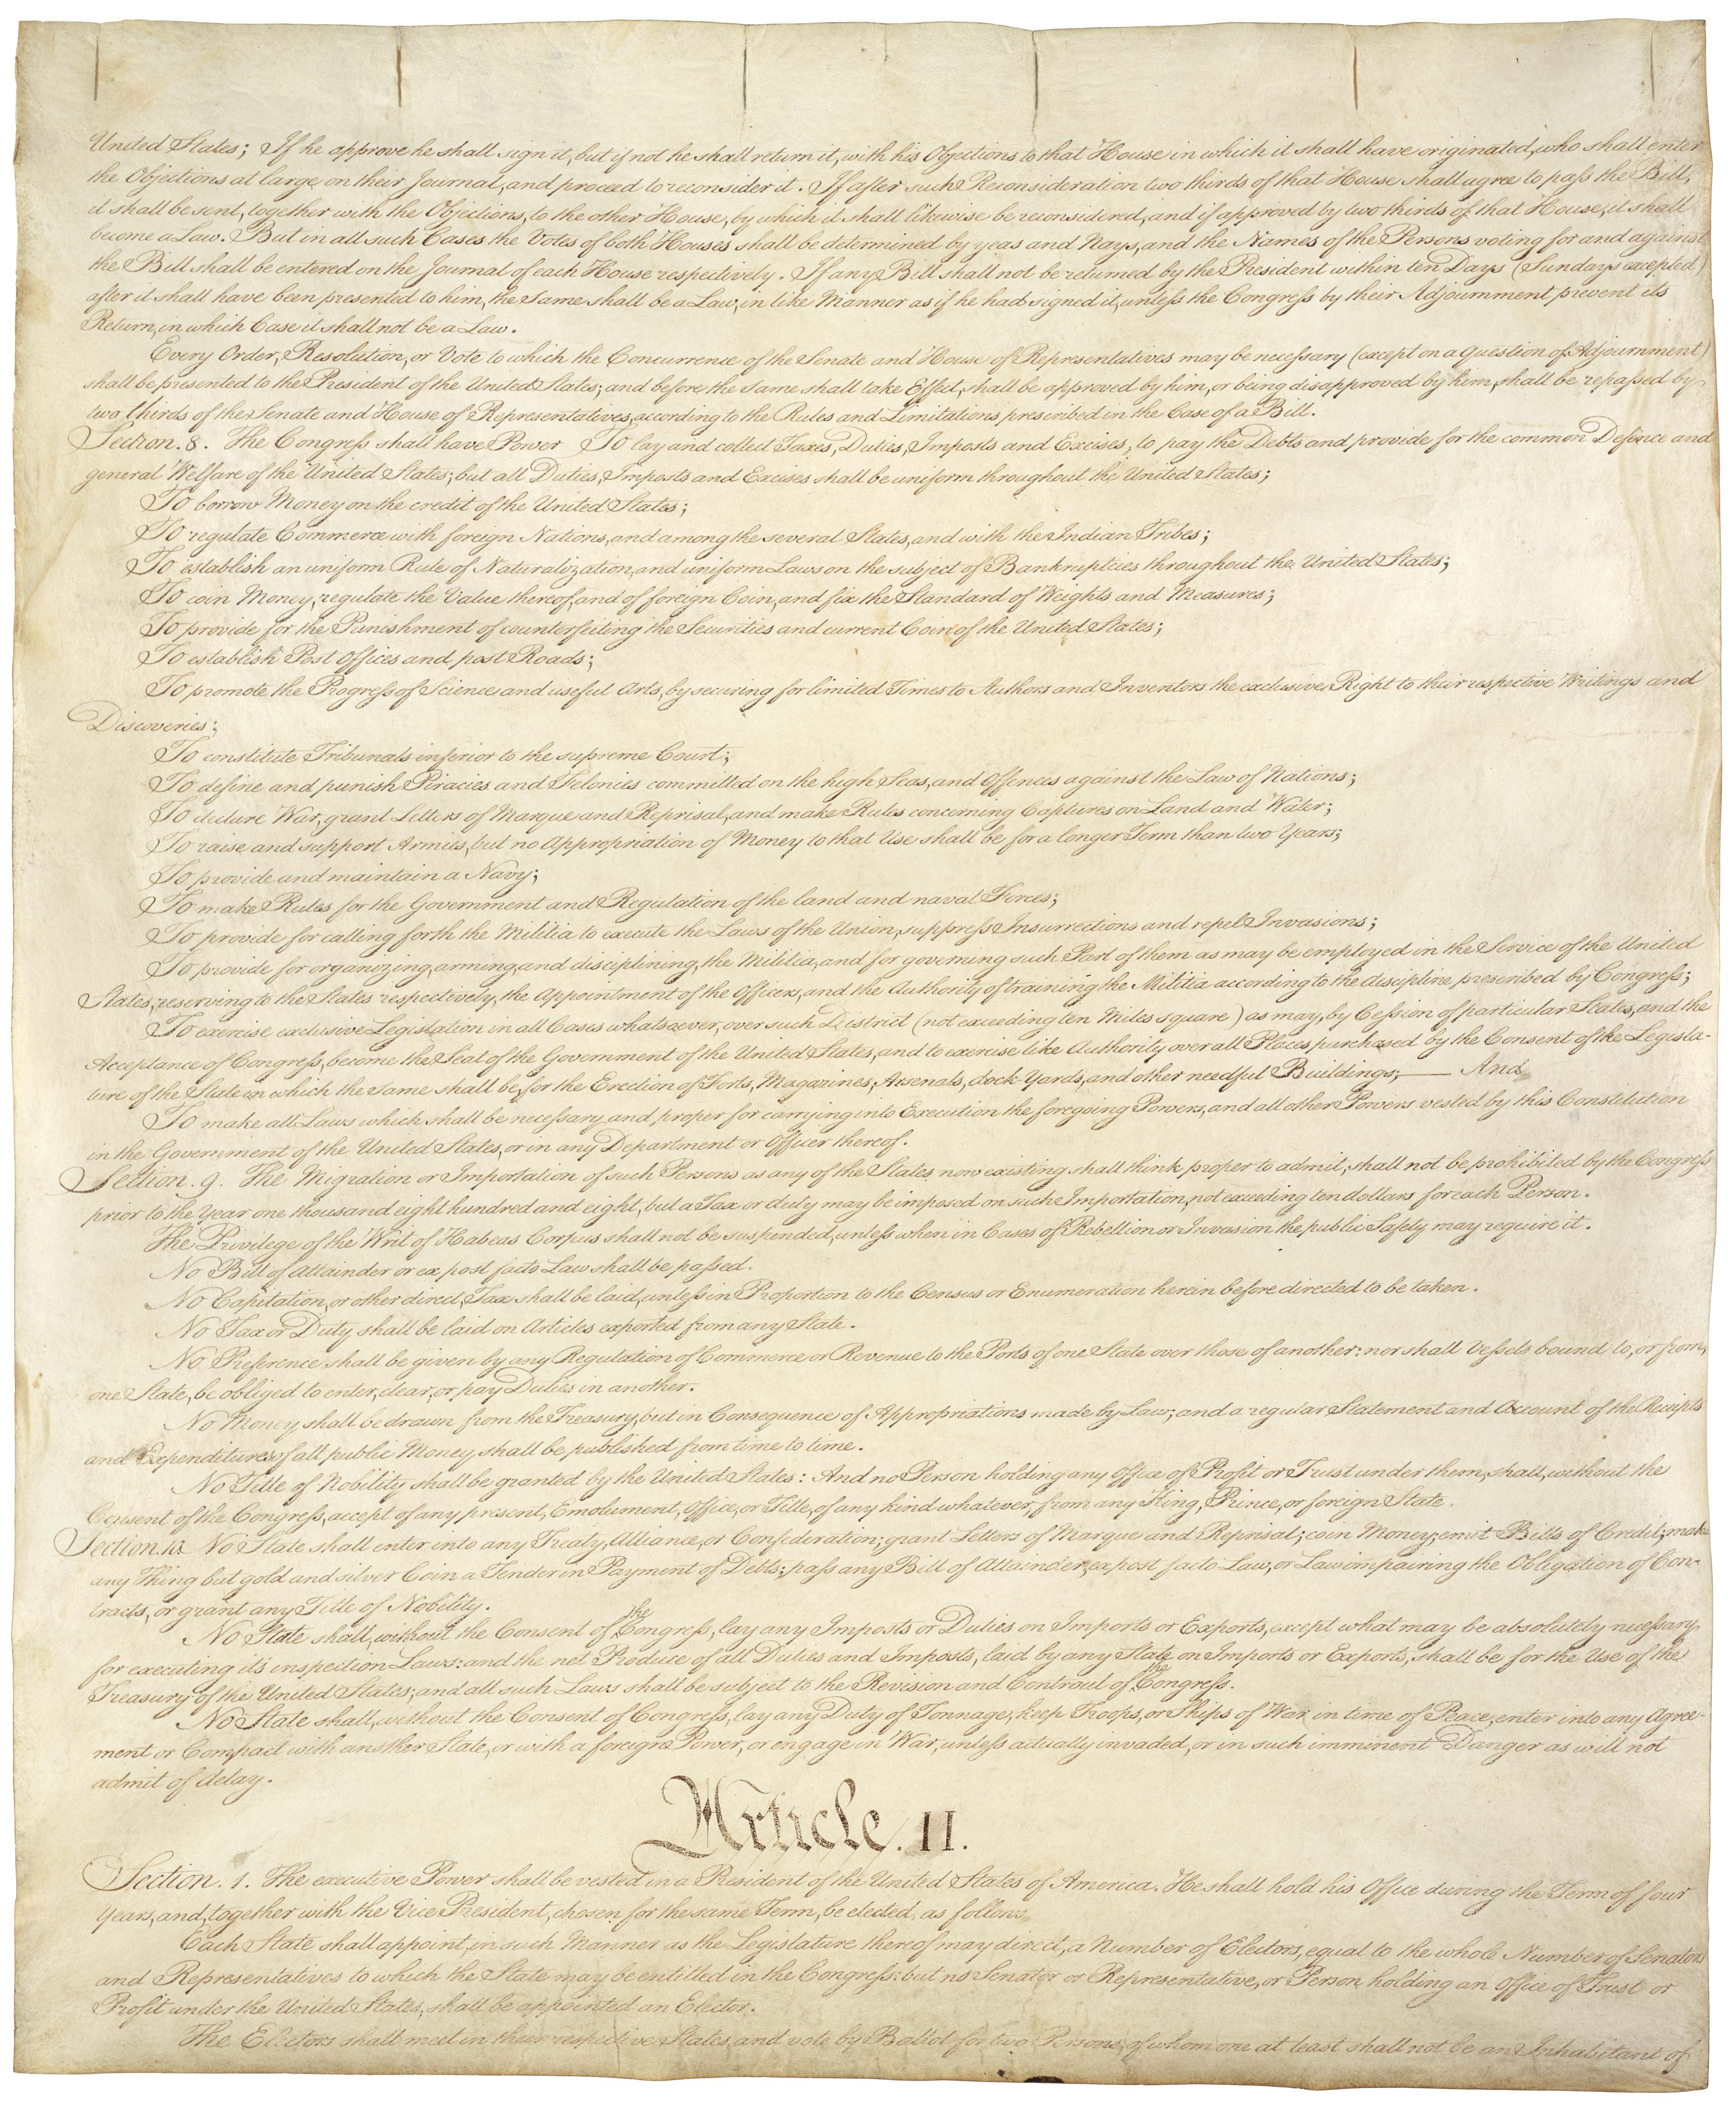 United States Constitution - Page 2 of 4